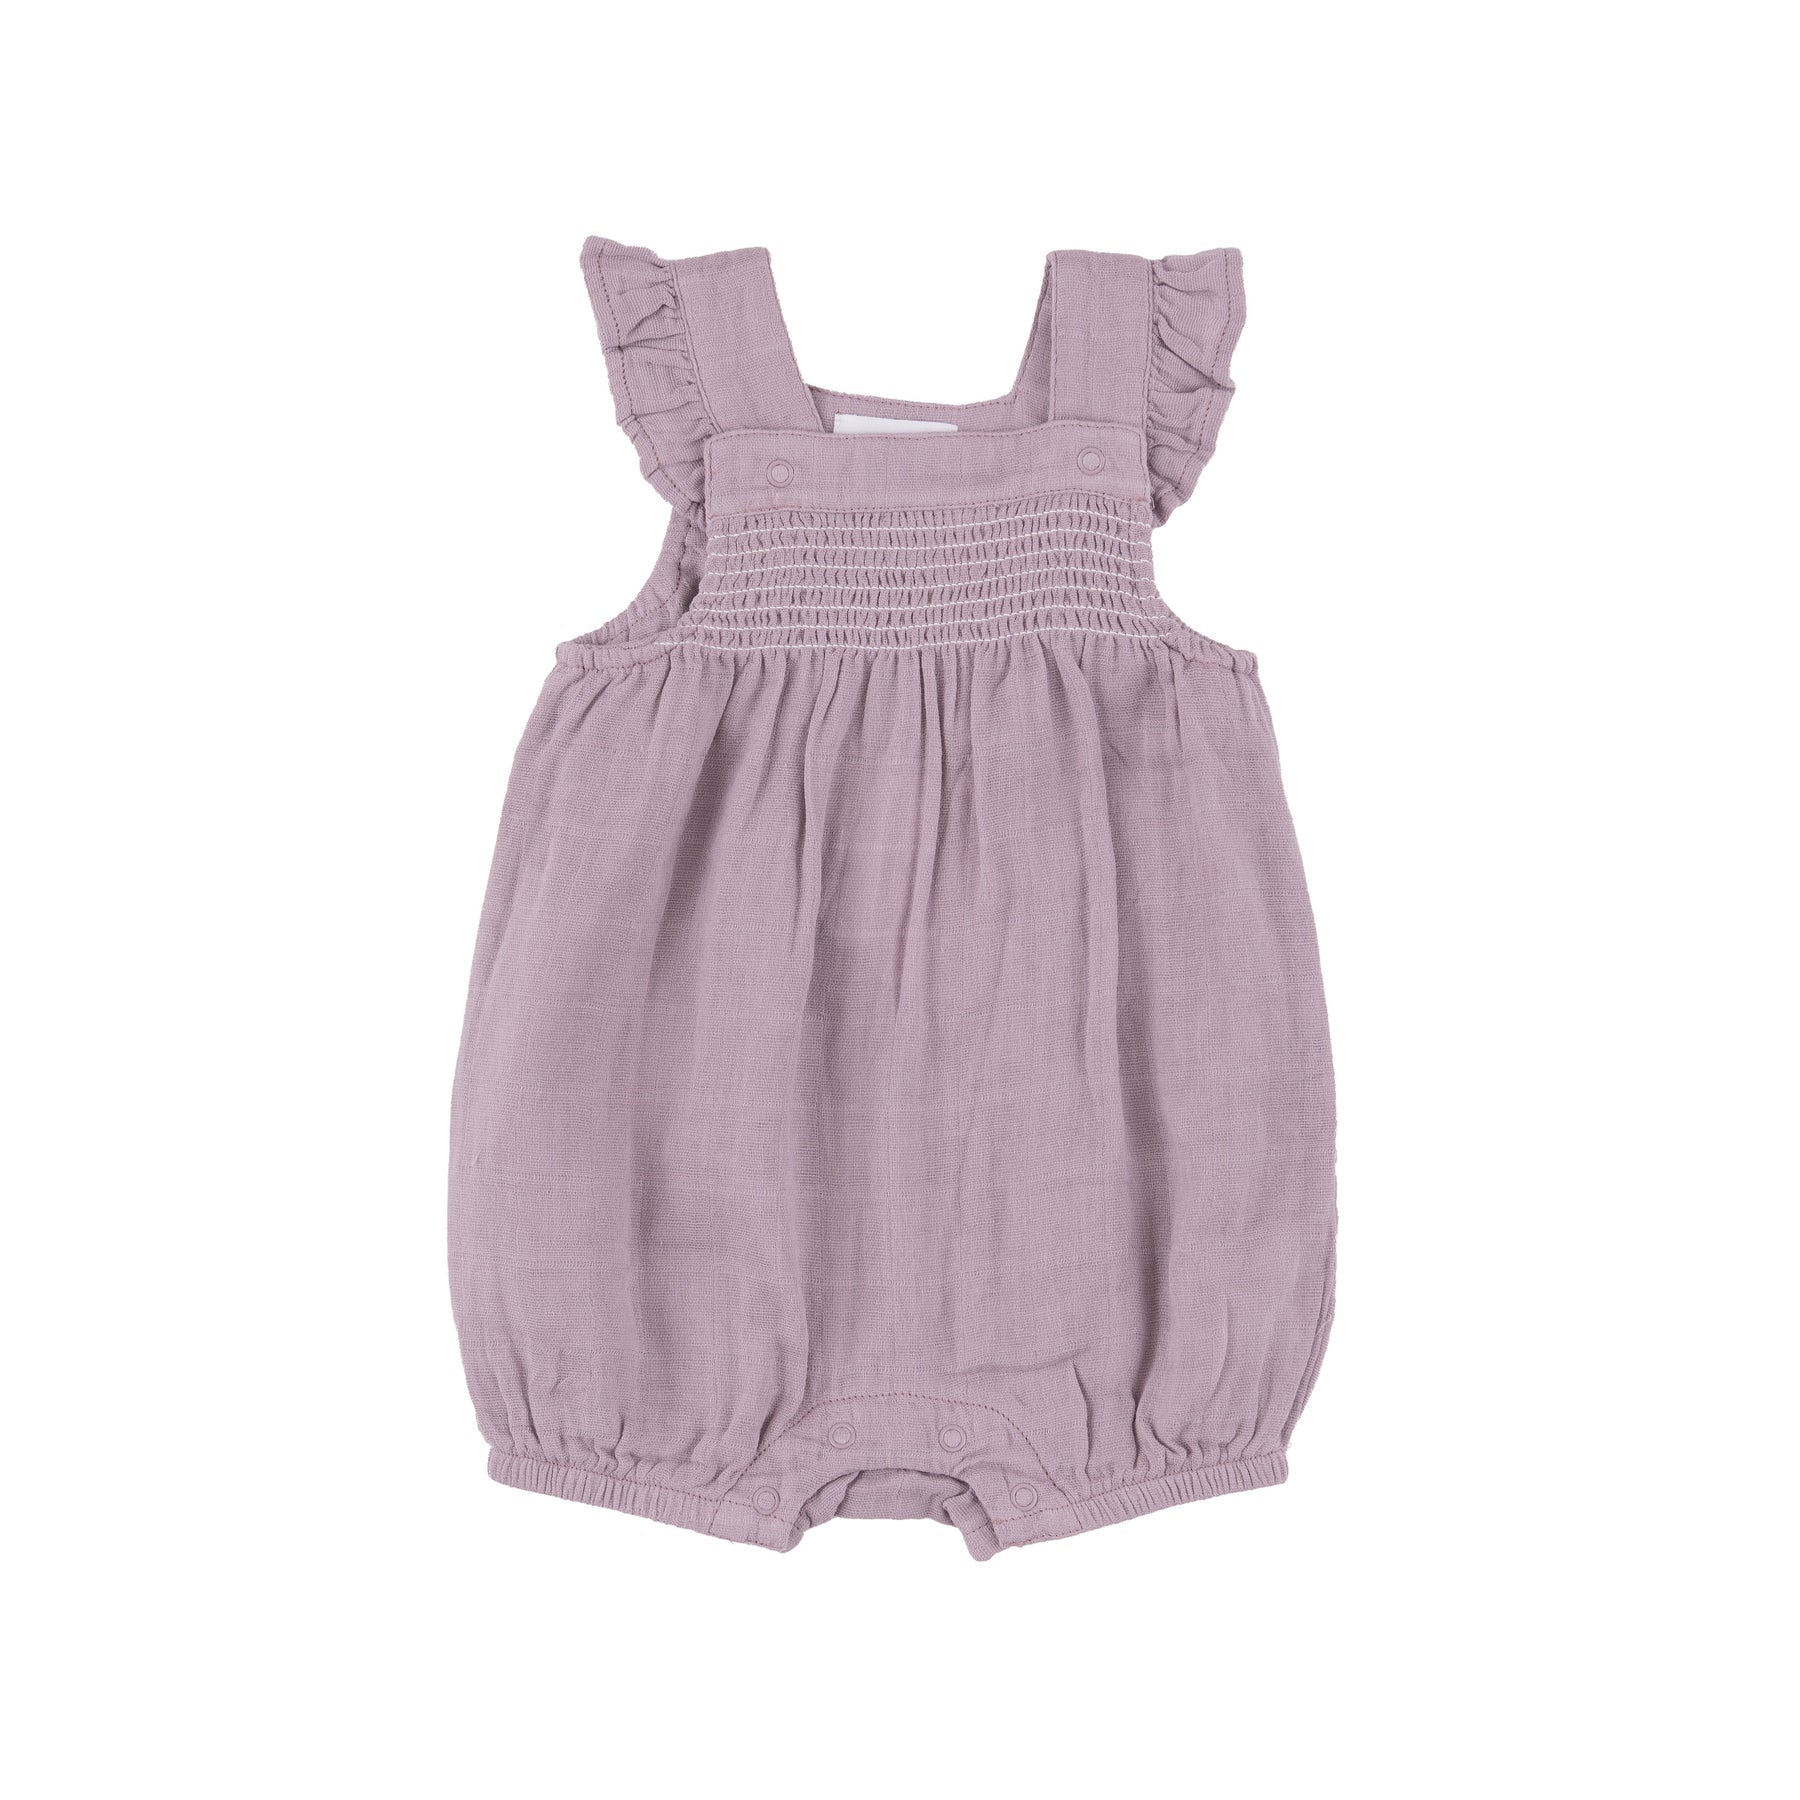 Dusty Lavender Muslin Smocked Front Overall Shortie